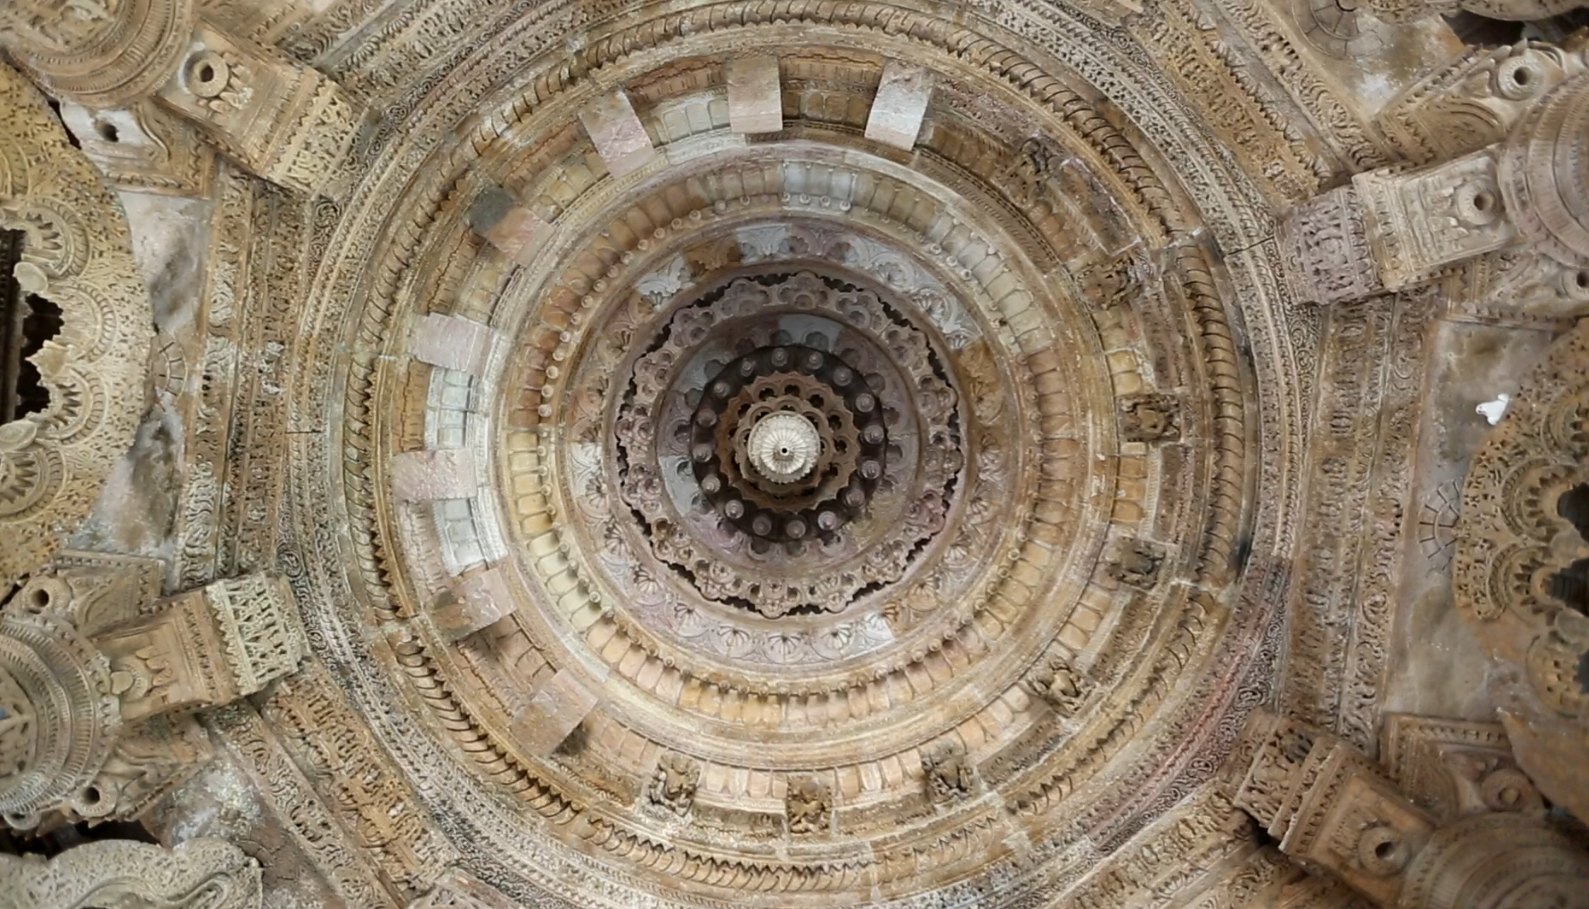 The ornamentation of the ceiling